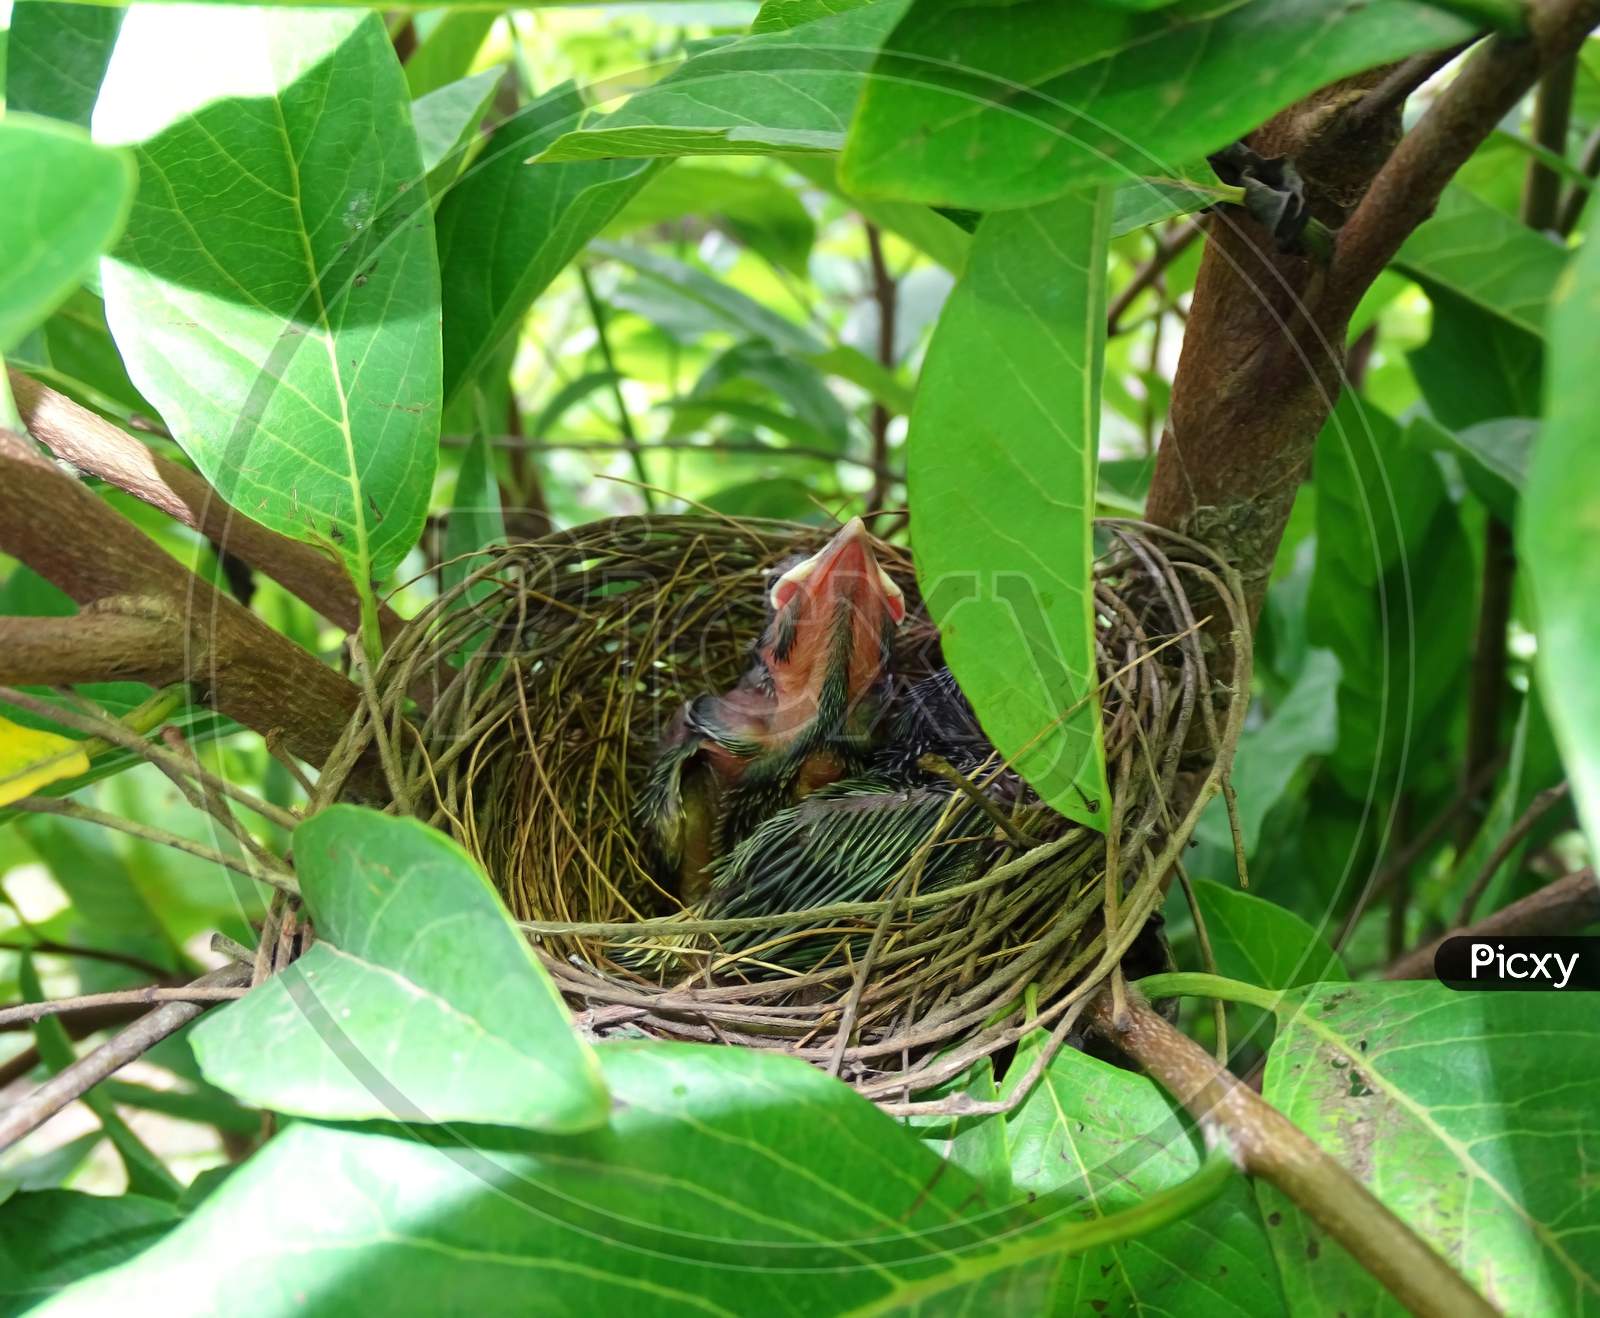 Birds nest with chicks, tree leaves background blur, selective focus on subject